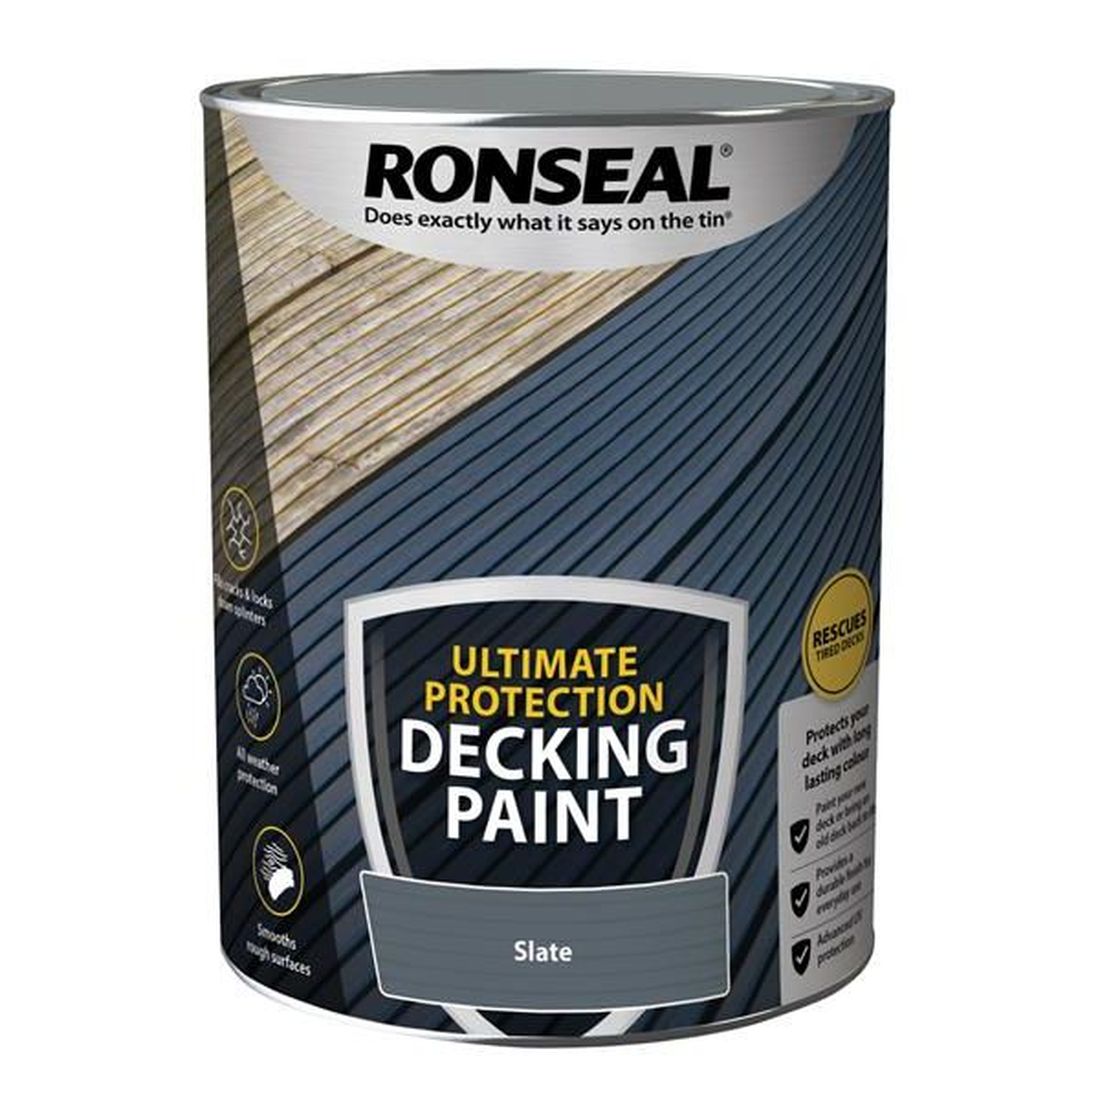 Ronseal Ultimate Protection Decking Paint Slate 5 litre                                 